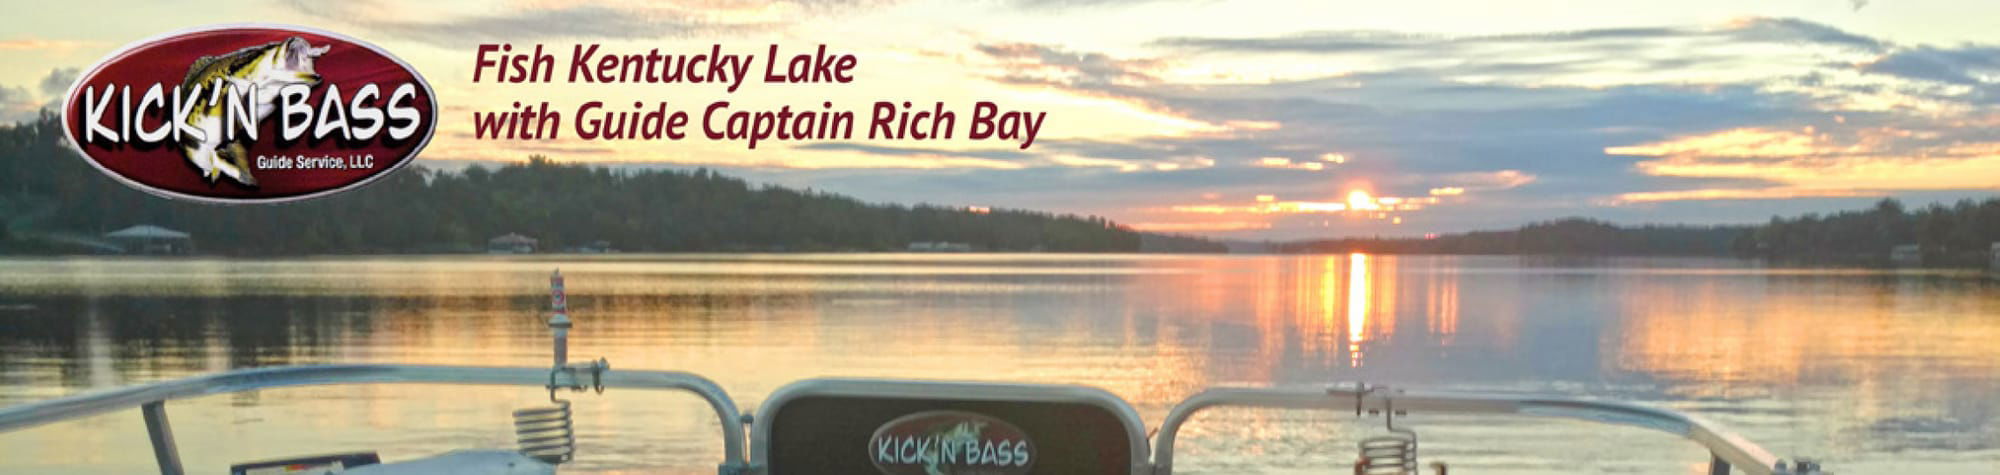 Your Kick'n Bass Fishing Report for April 30, 2020